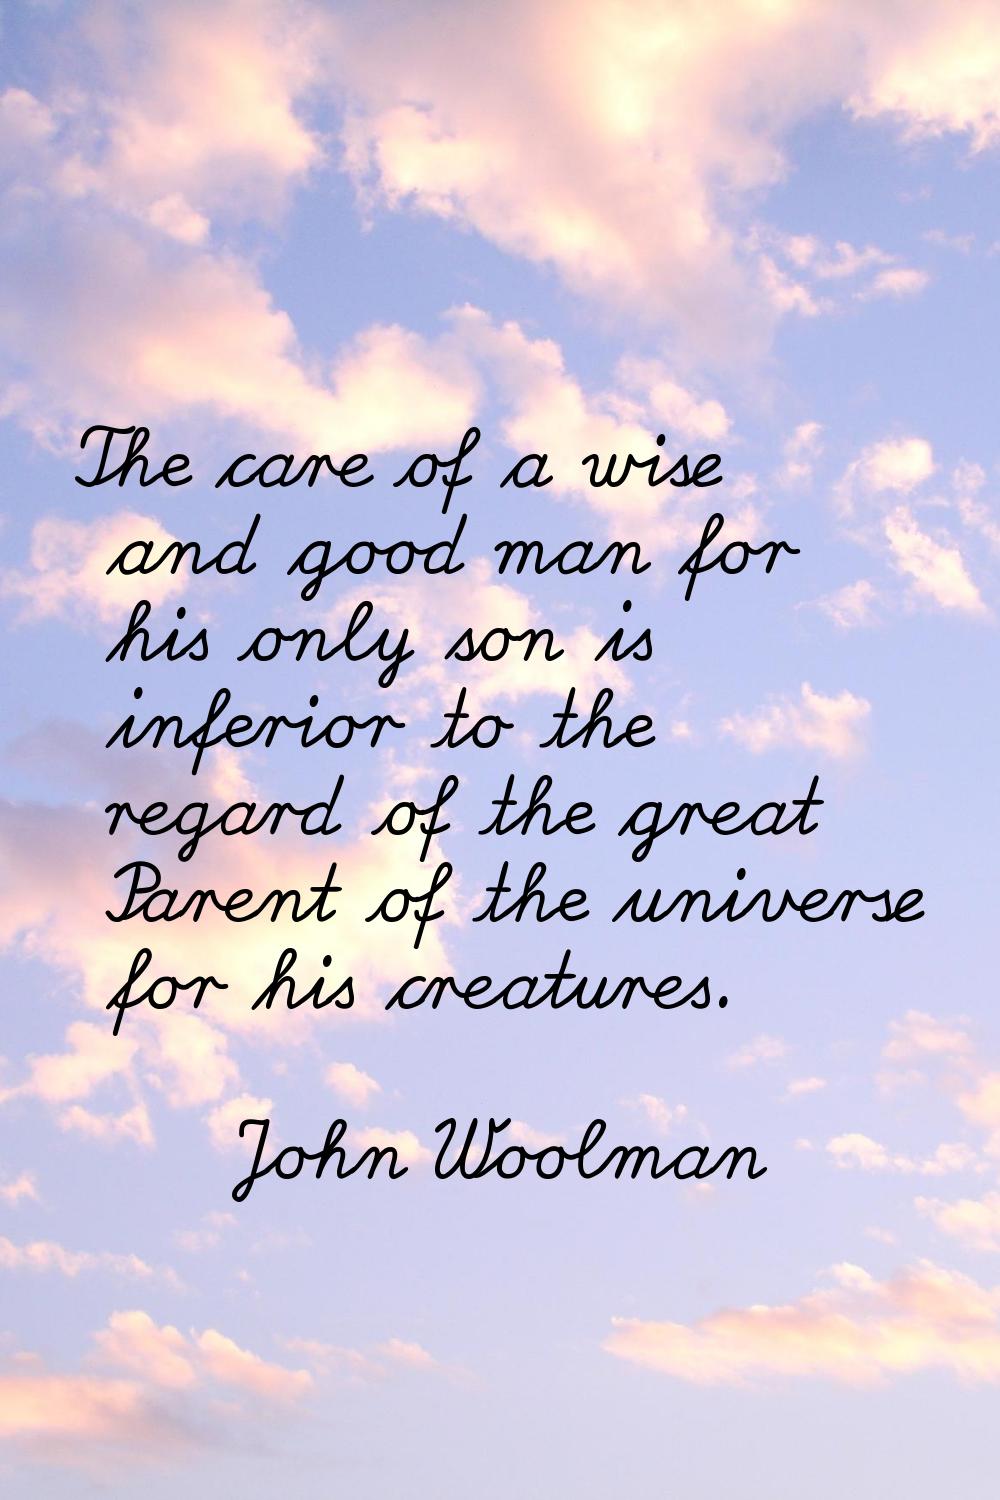 The care of a wise and good man for his only son is inferior to the regard of the great Parent of t